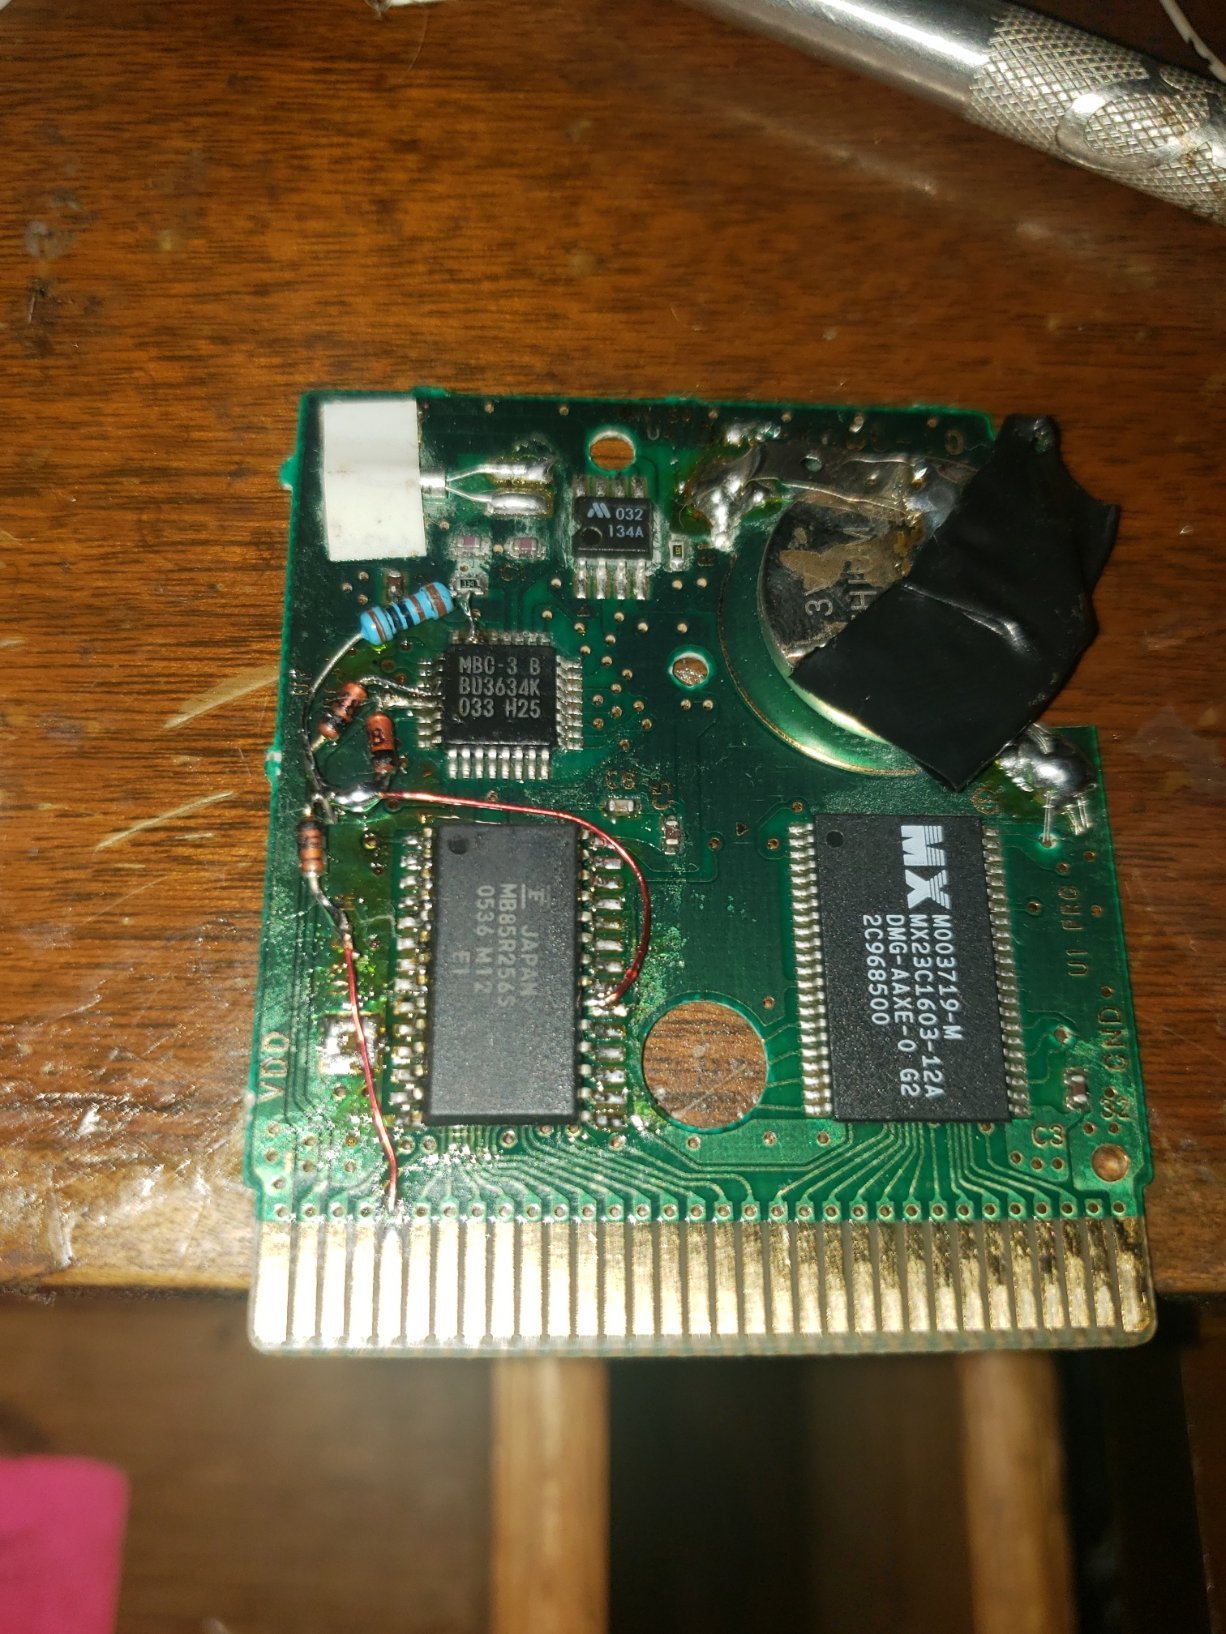 I managed to save a broken Pokémon yellow game last night by switching the  rom chip to a working Nsync PCB board. The game booted right up after the  swap 😁 